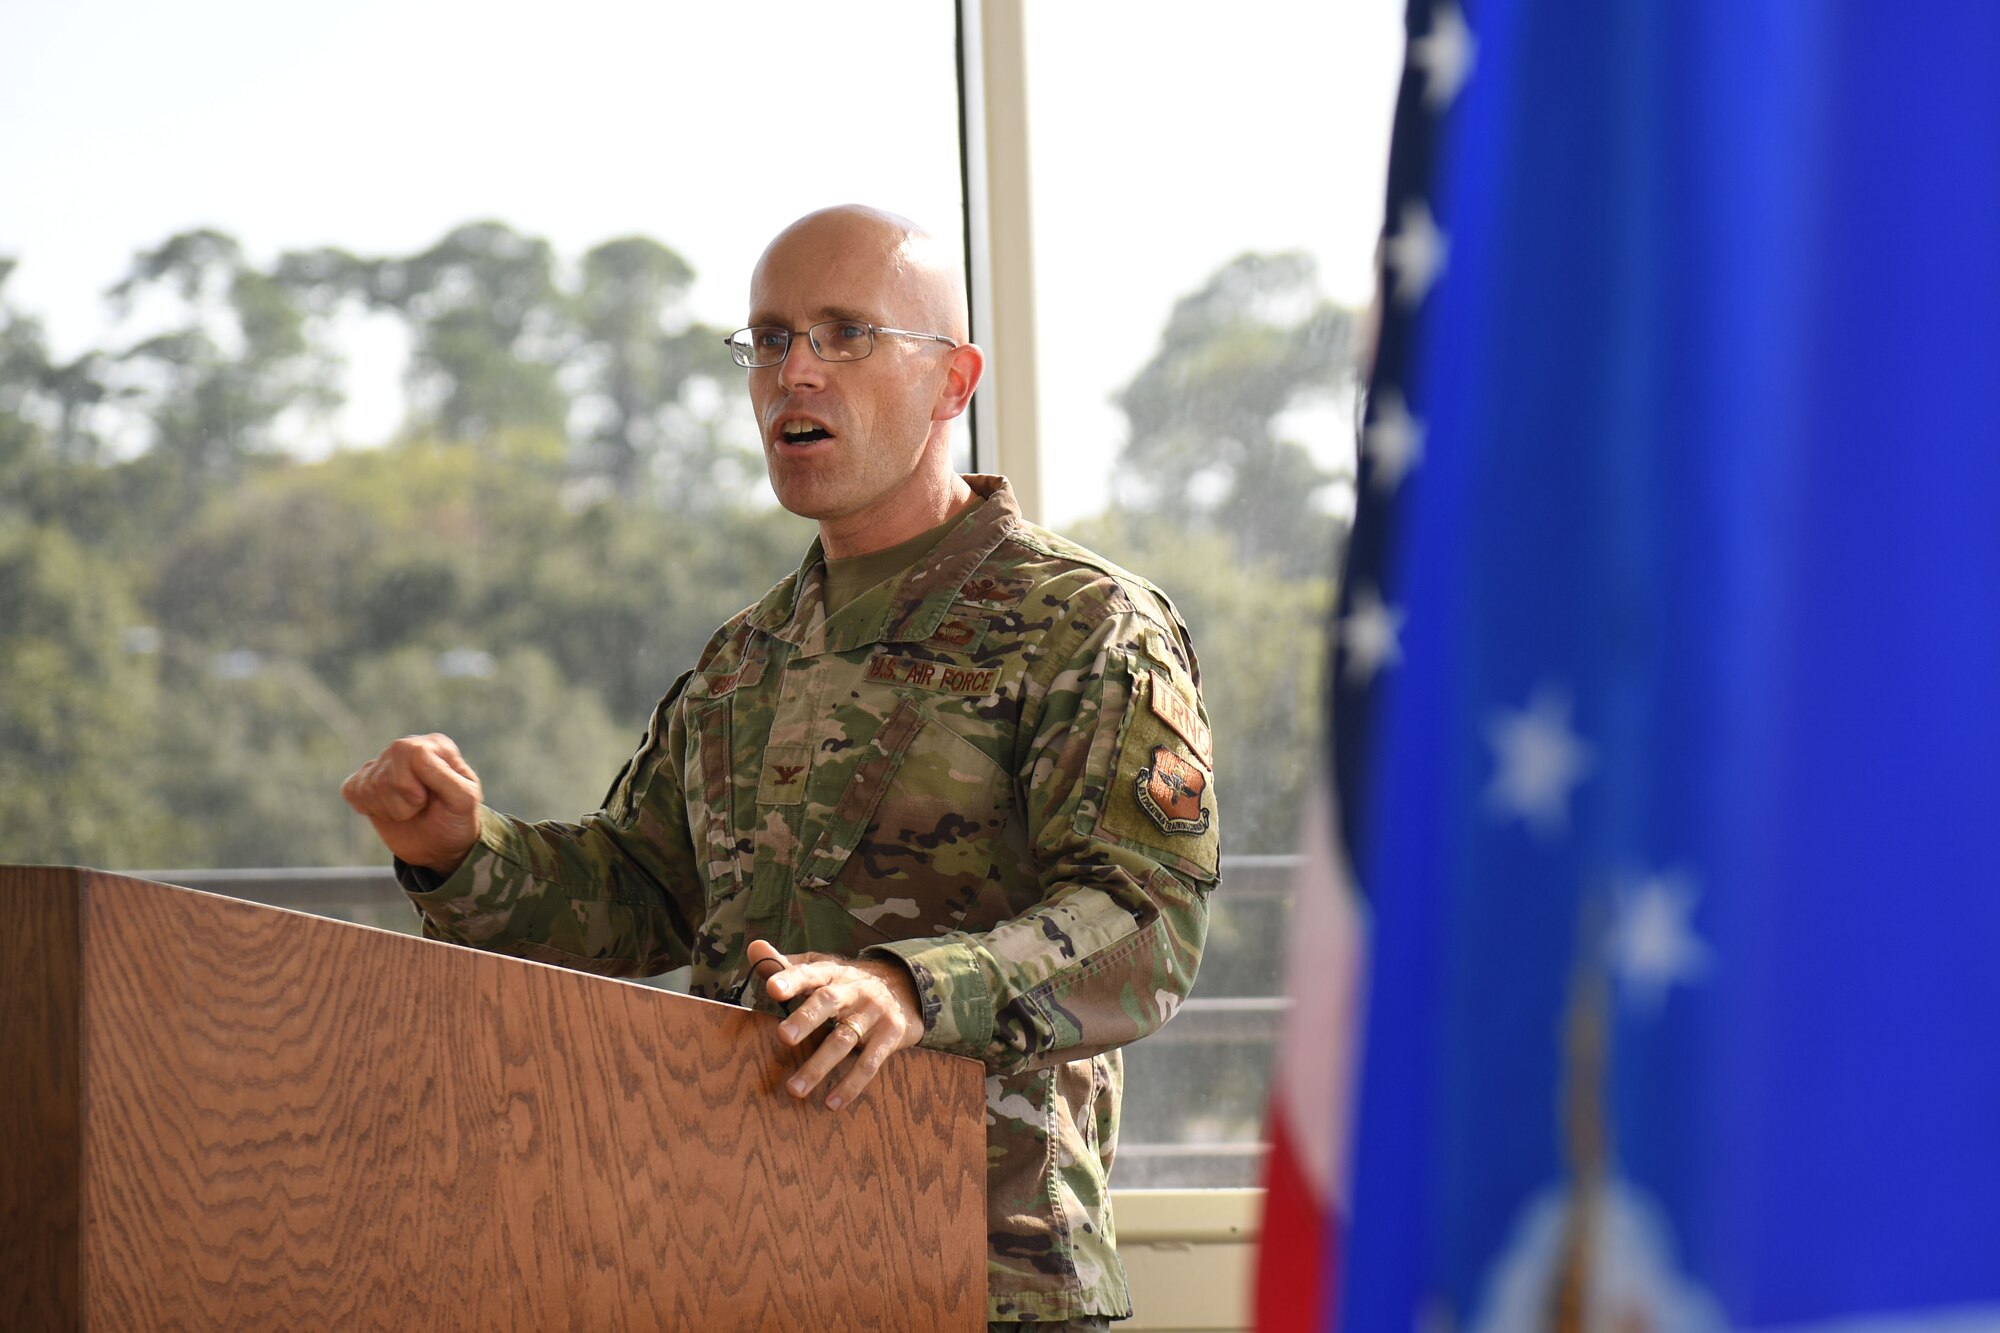 U.S. Air Force Col. Chance Geray, 81st Training Group commander, delivers remarks during the Space Weather Support Course ribbon cutting ceremony inside the Weather Training Complex at Keesler Air Force Base, Mississippi, Nov. 3, 2021. The course will apply knowledge of the effects of the natural environment on space systems and also space weather effects on terrestrial systems in support of multi-domain operations. (U.S. Air Force photo by Kemberly Groue)